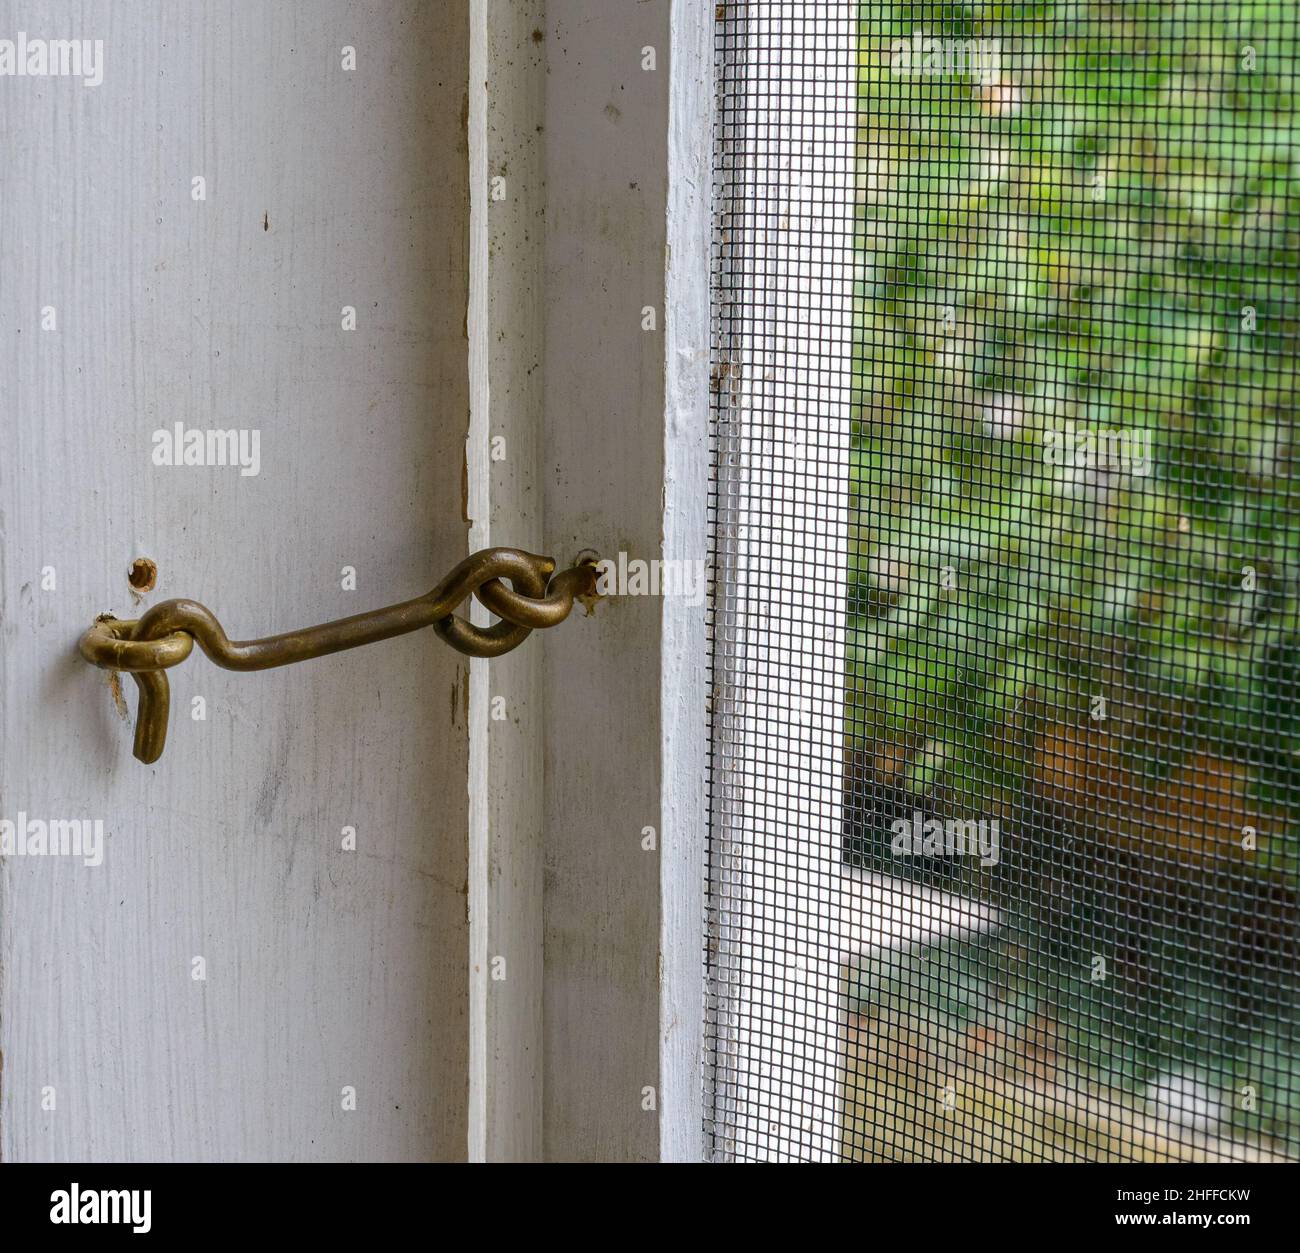 https://c8.alamy.com/comp/2HFFCKW/screen-door-and-attached-hook-latch-with-eye-2HFFCKW.jpg